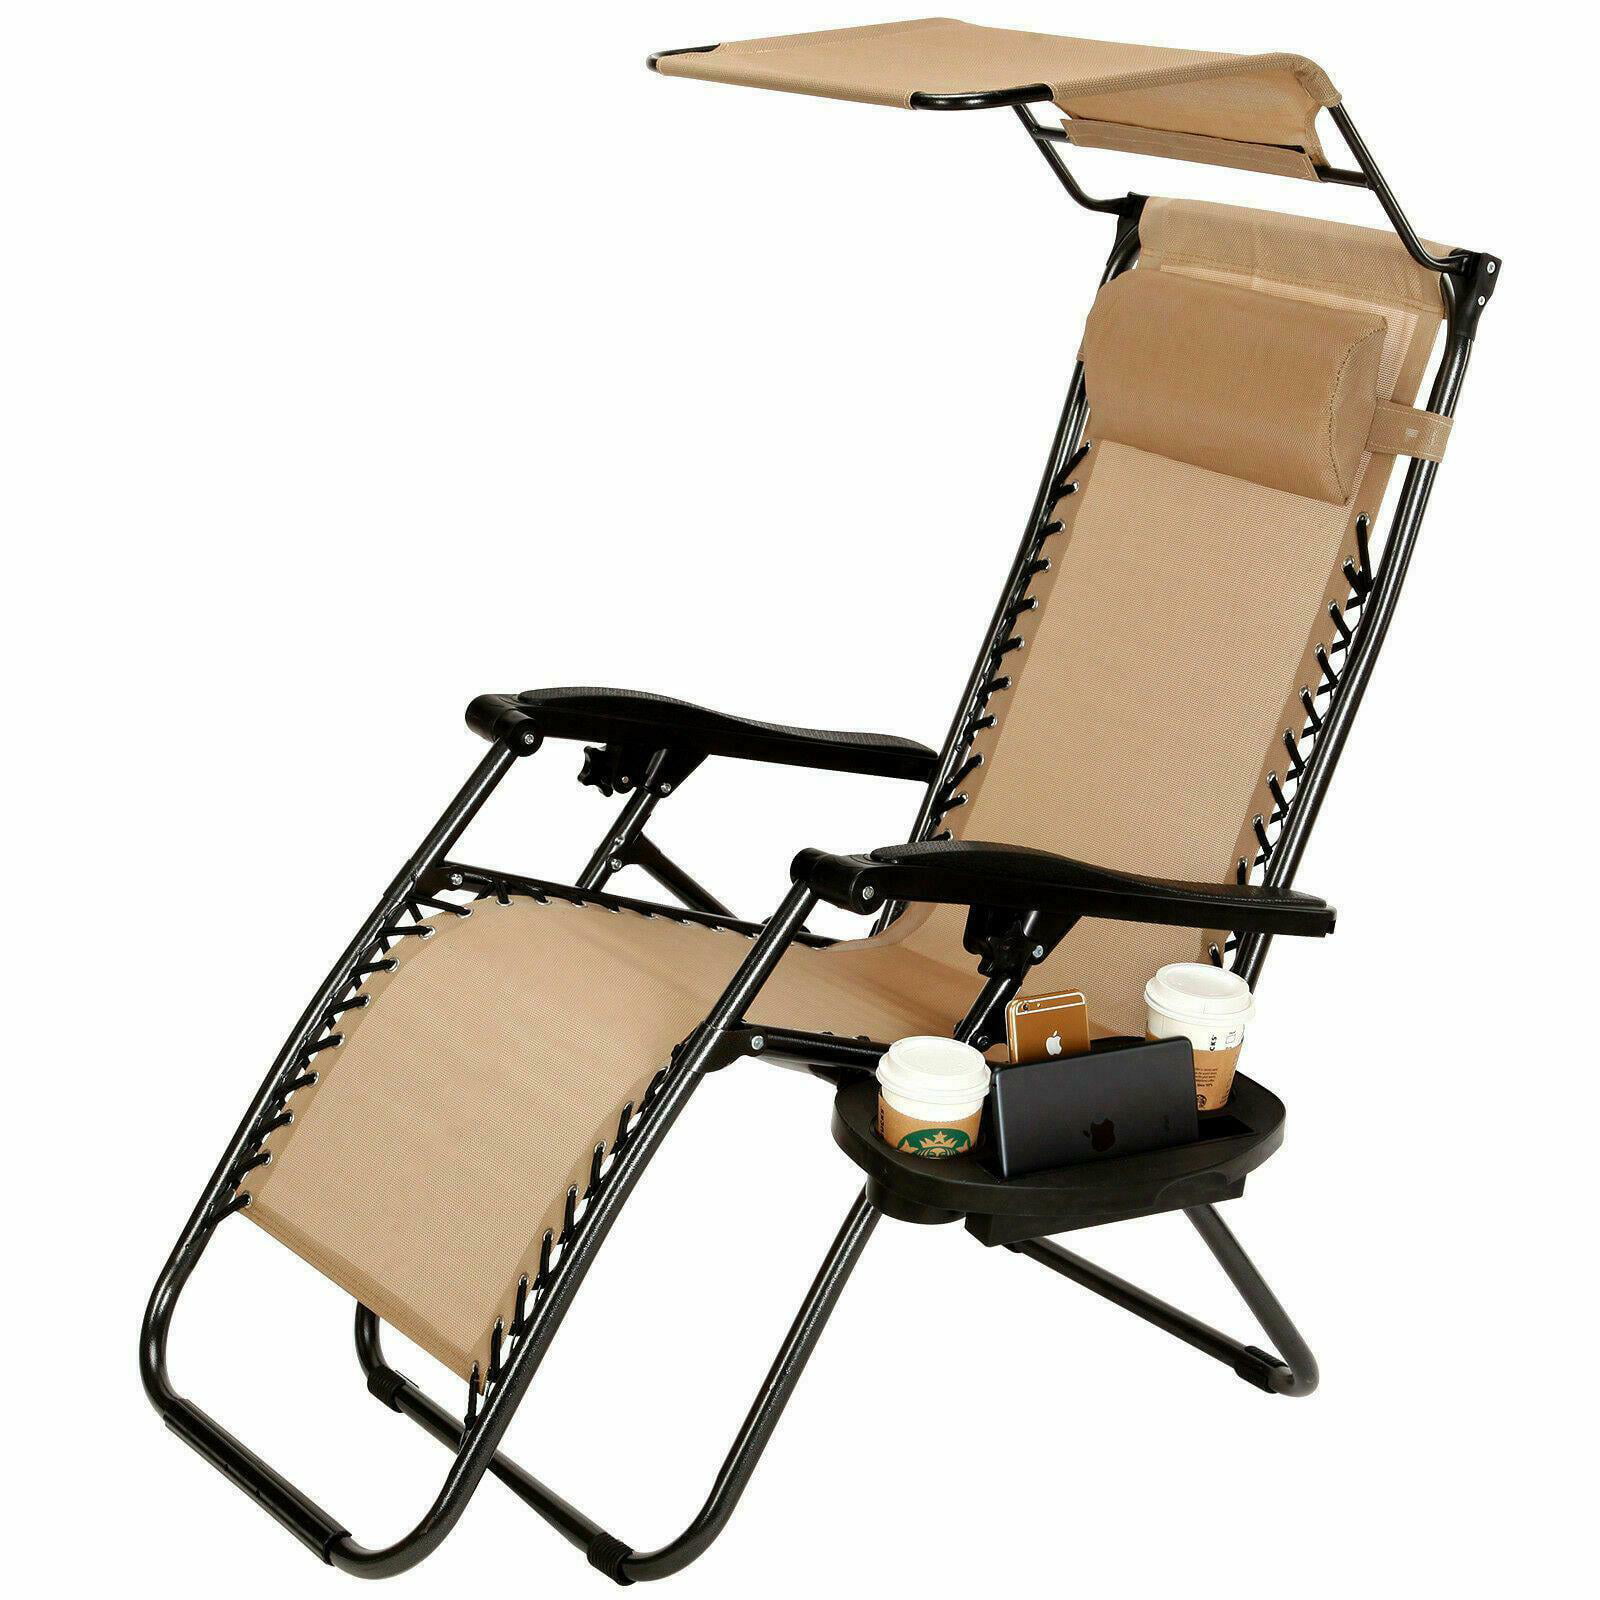 Details about   1PC Zero Gravity Folding Patio Lounge Beach Chair w/ Canopy Sunshade Cup Holder 